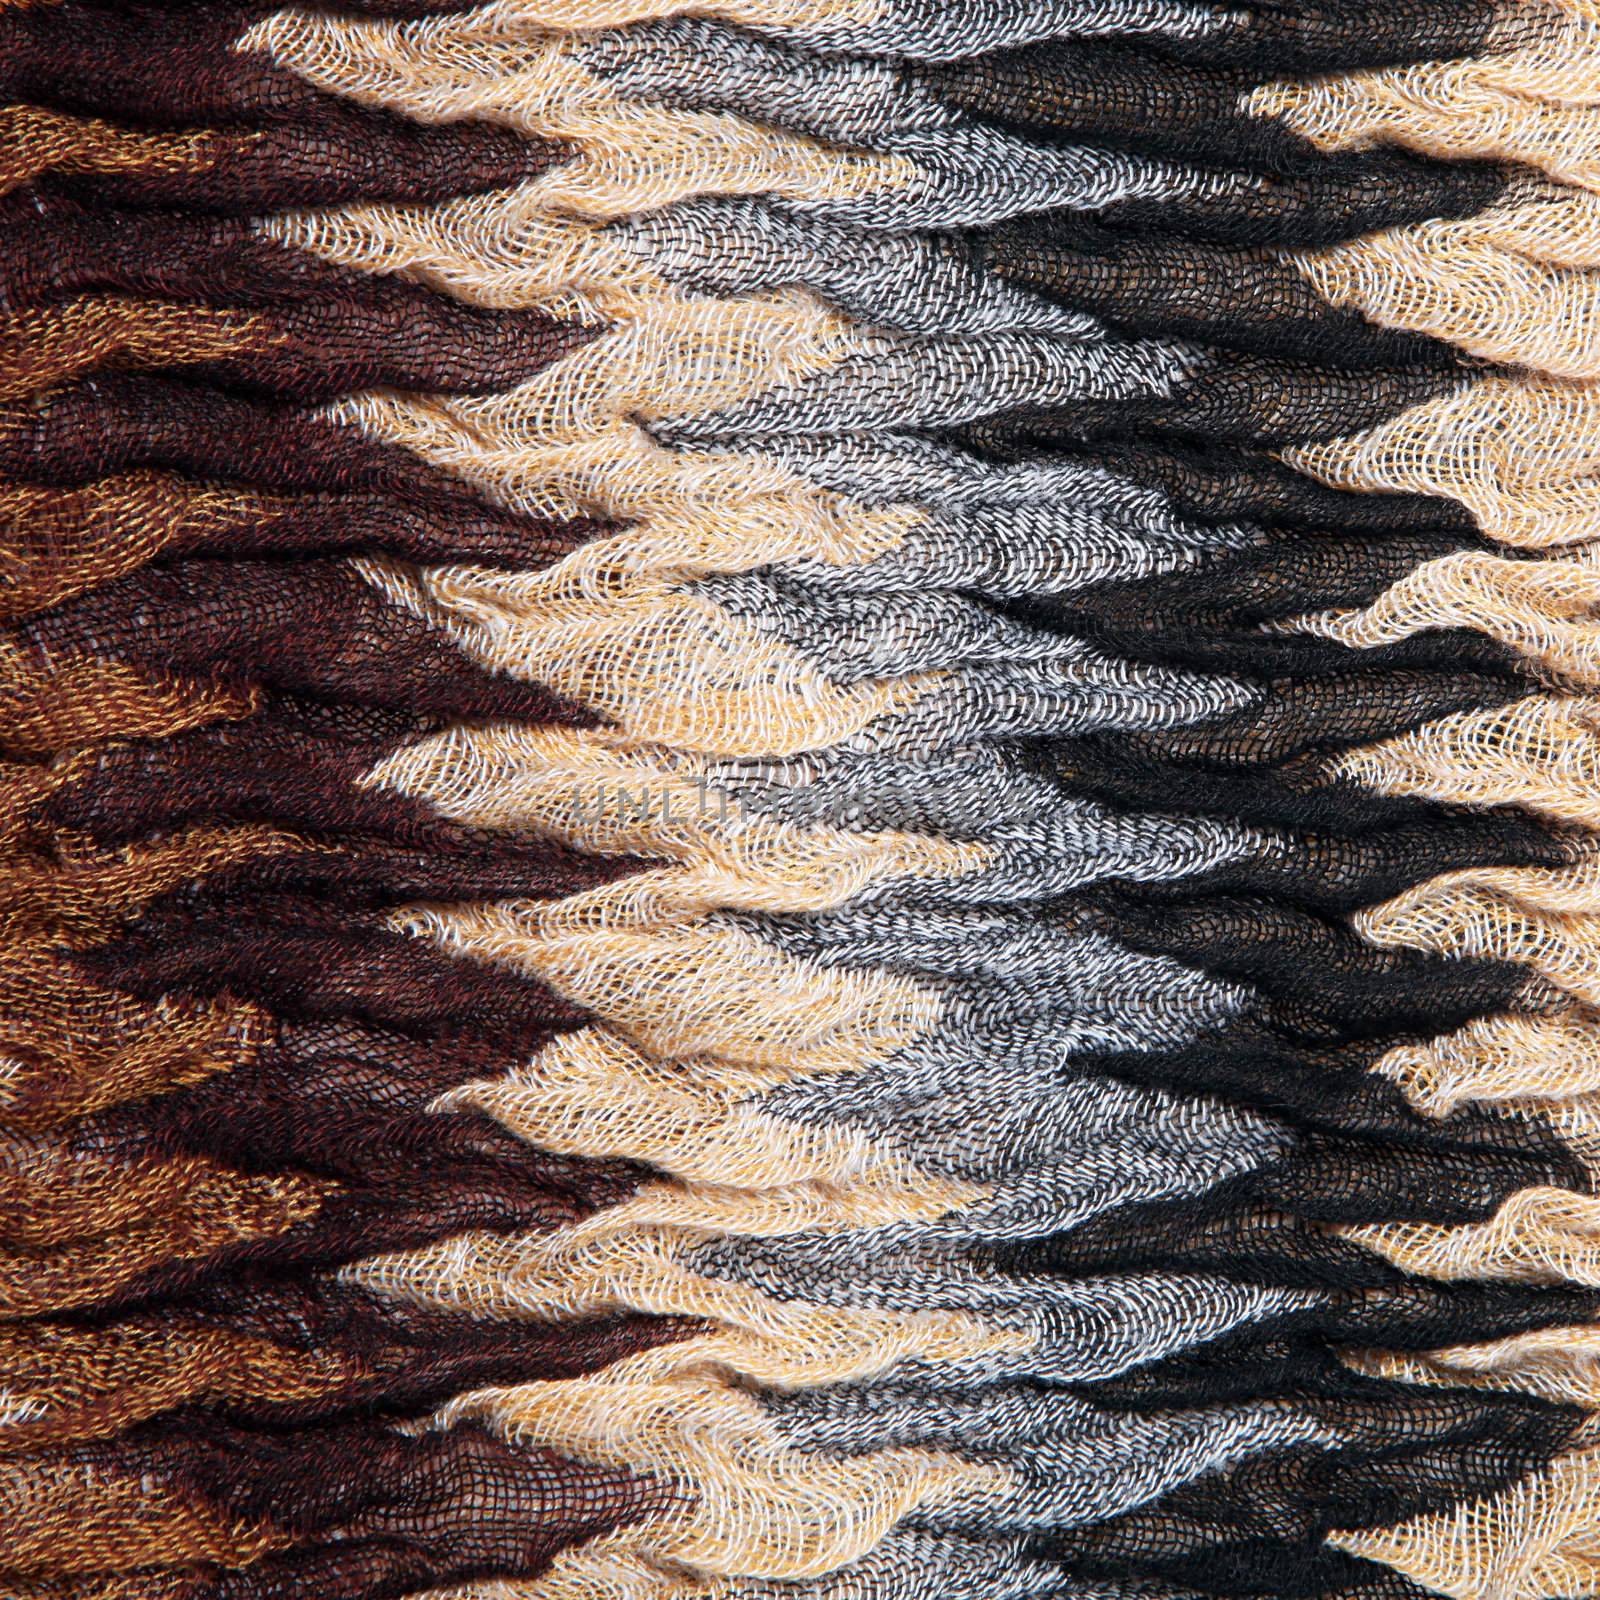 Soft luxurious ruched fabric with a knit texture and distinctive zig-zag striped pattern in shades of brown and grey